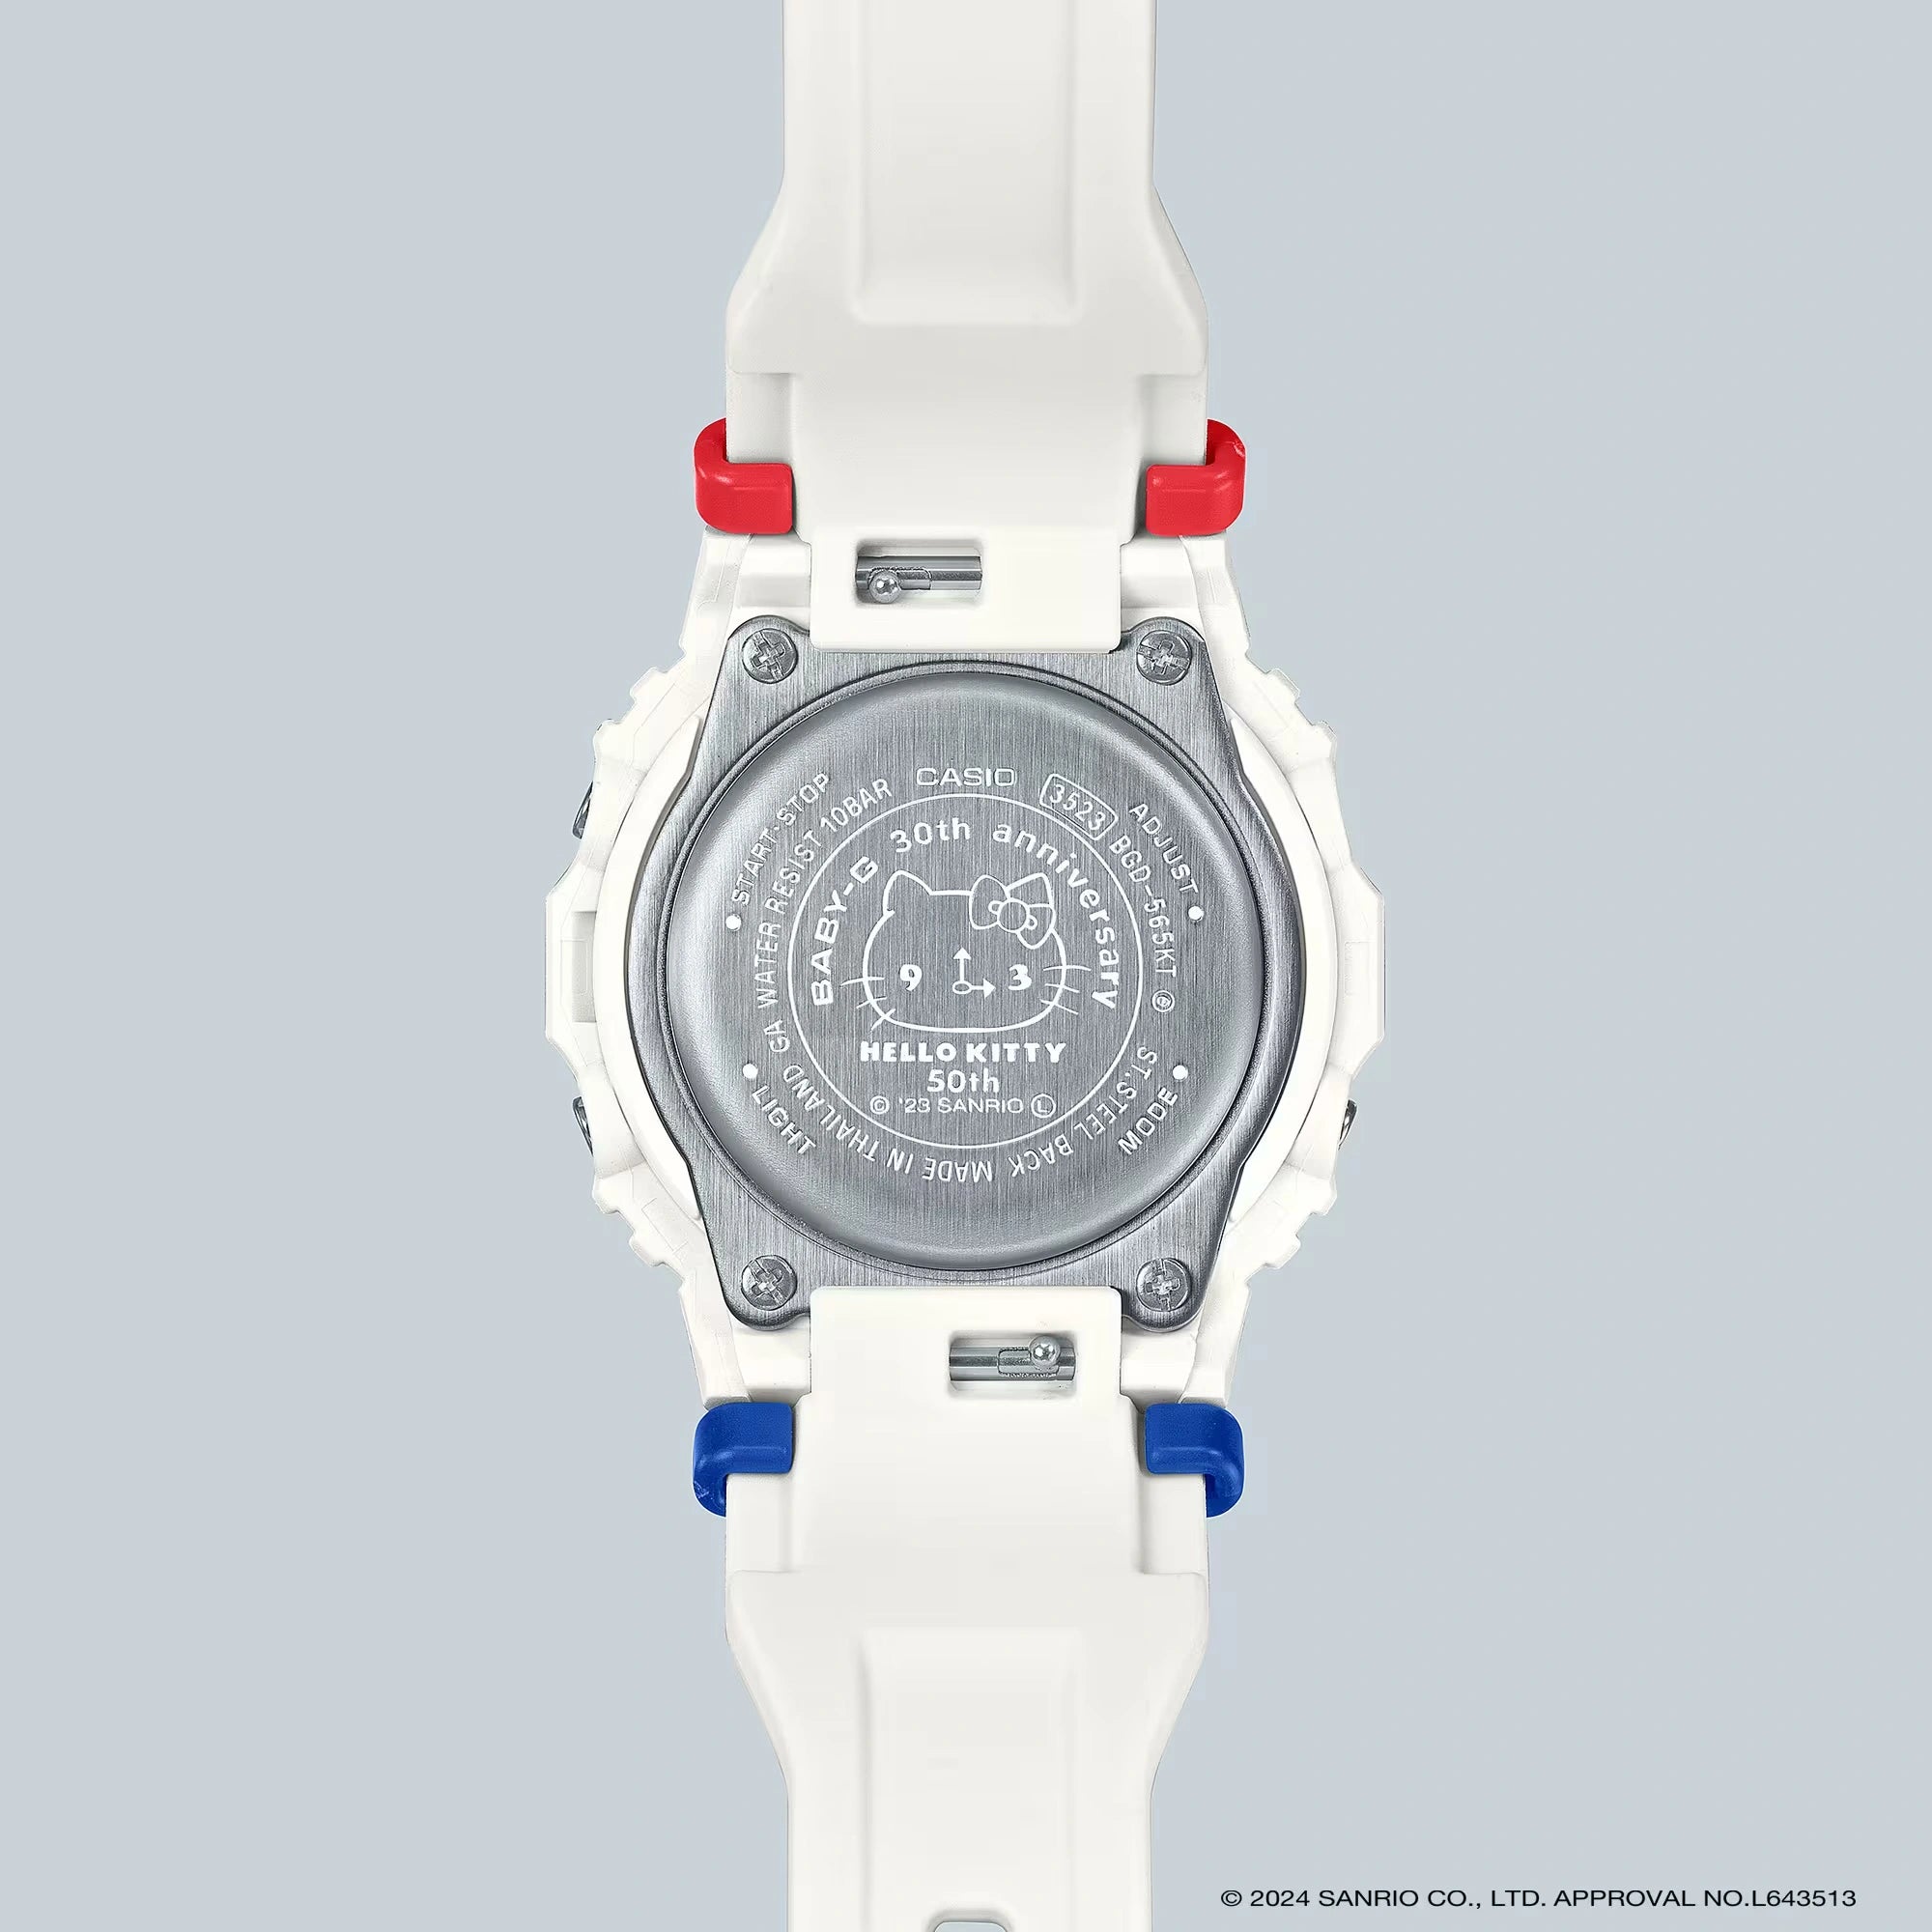 Back detail of Baby-G x Hello Kitty watch showing engraved Hello Kitty design with watch hands and numbers on her face.